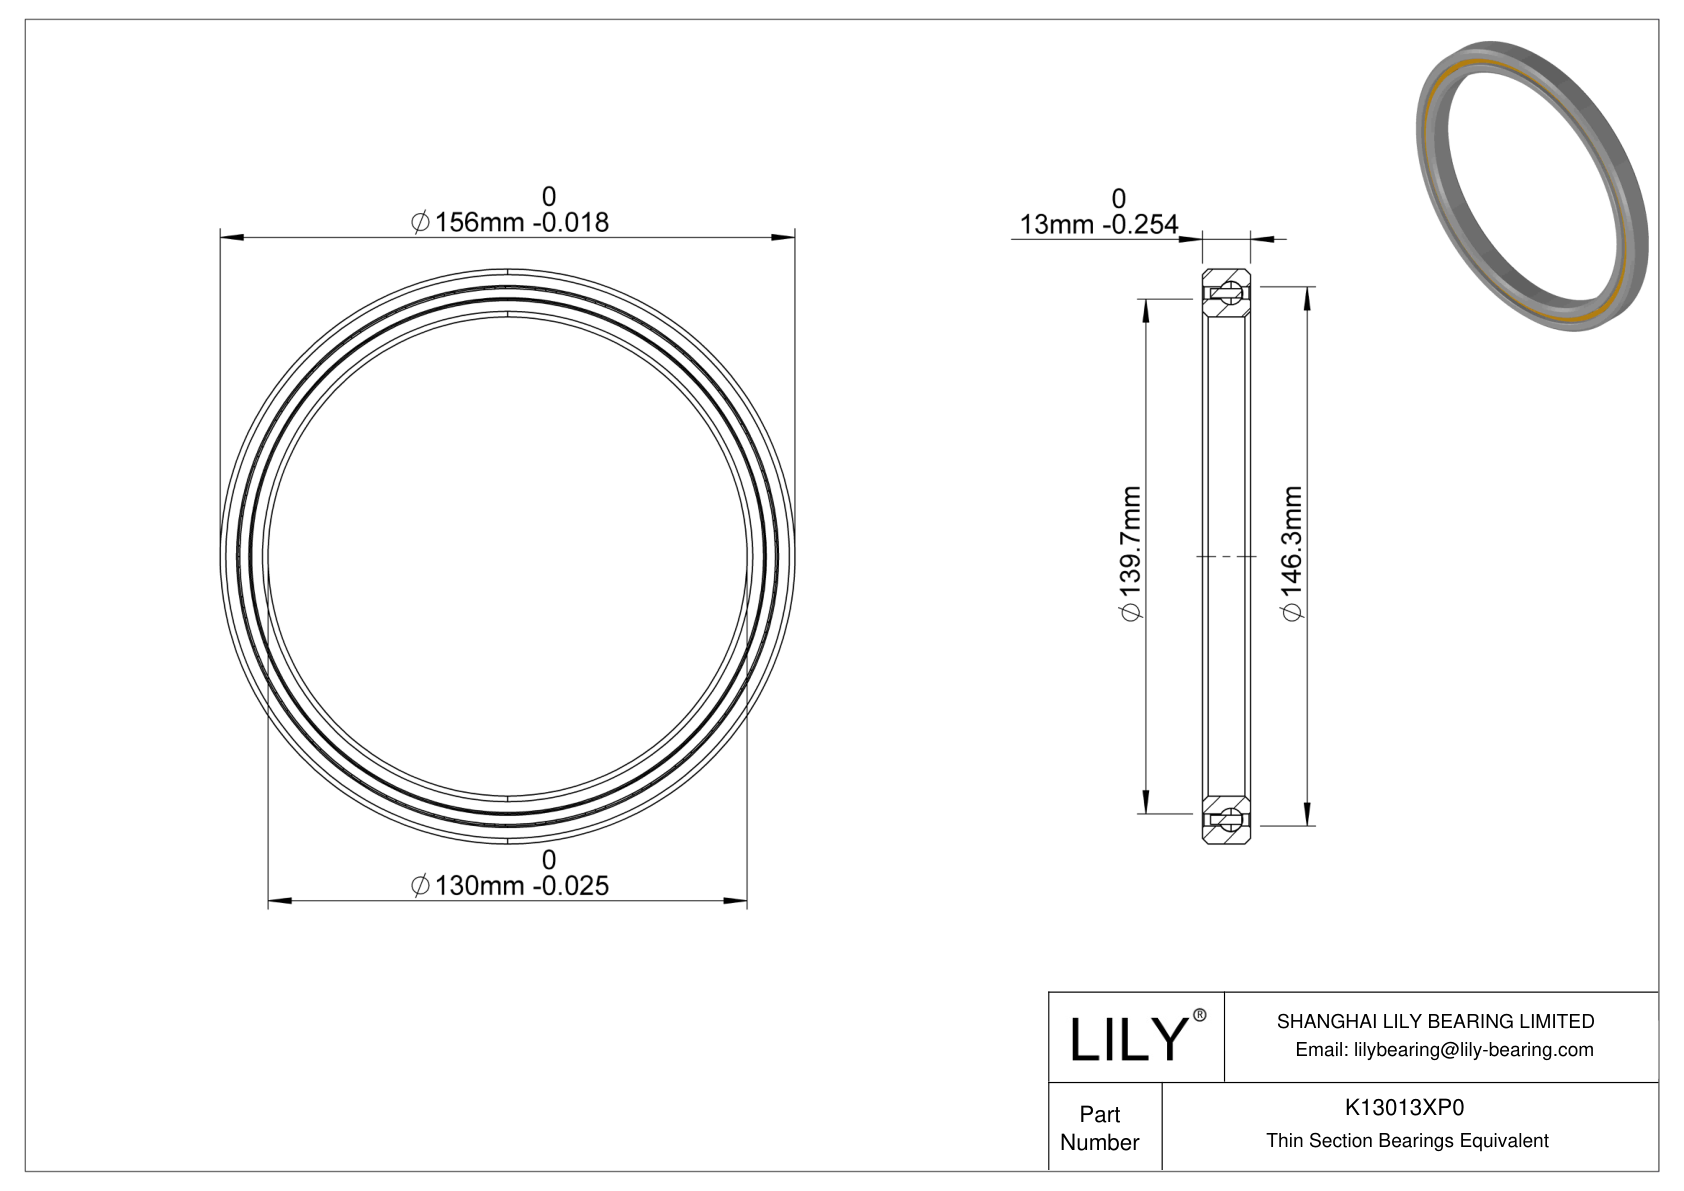 K13013XP0 Constant Section (CS) Bearings cad drawing